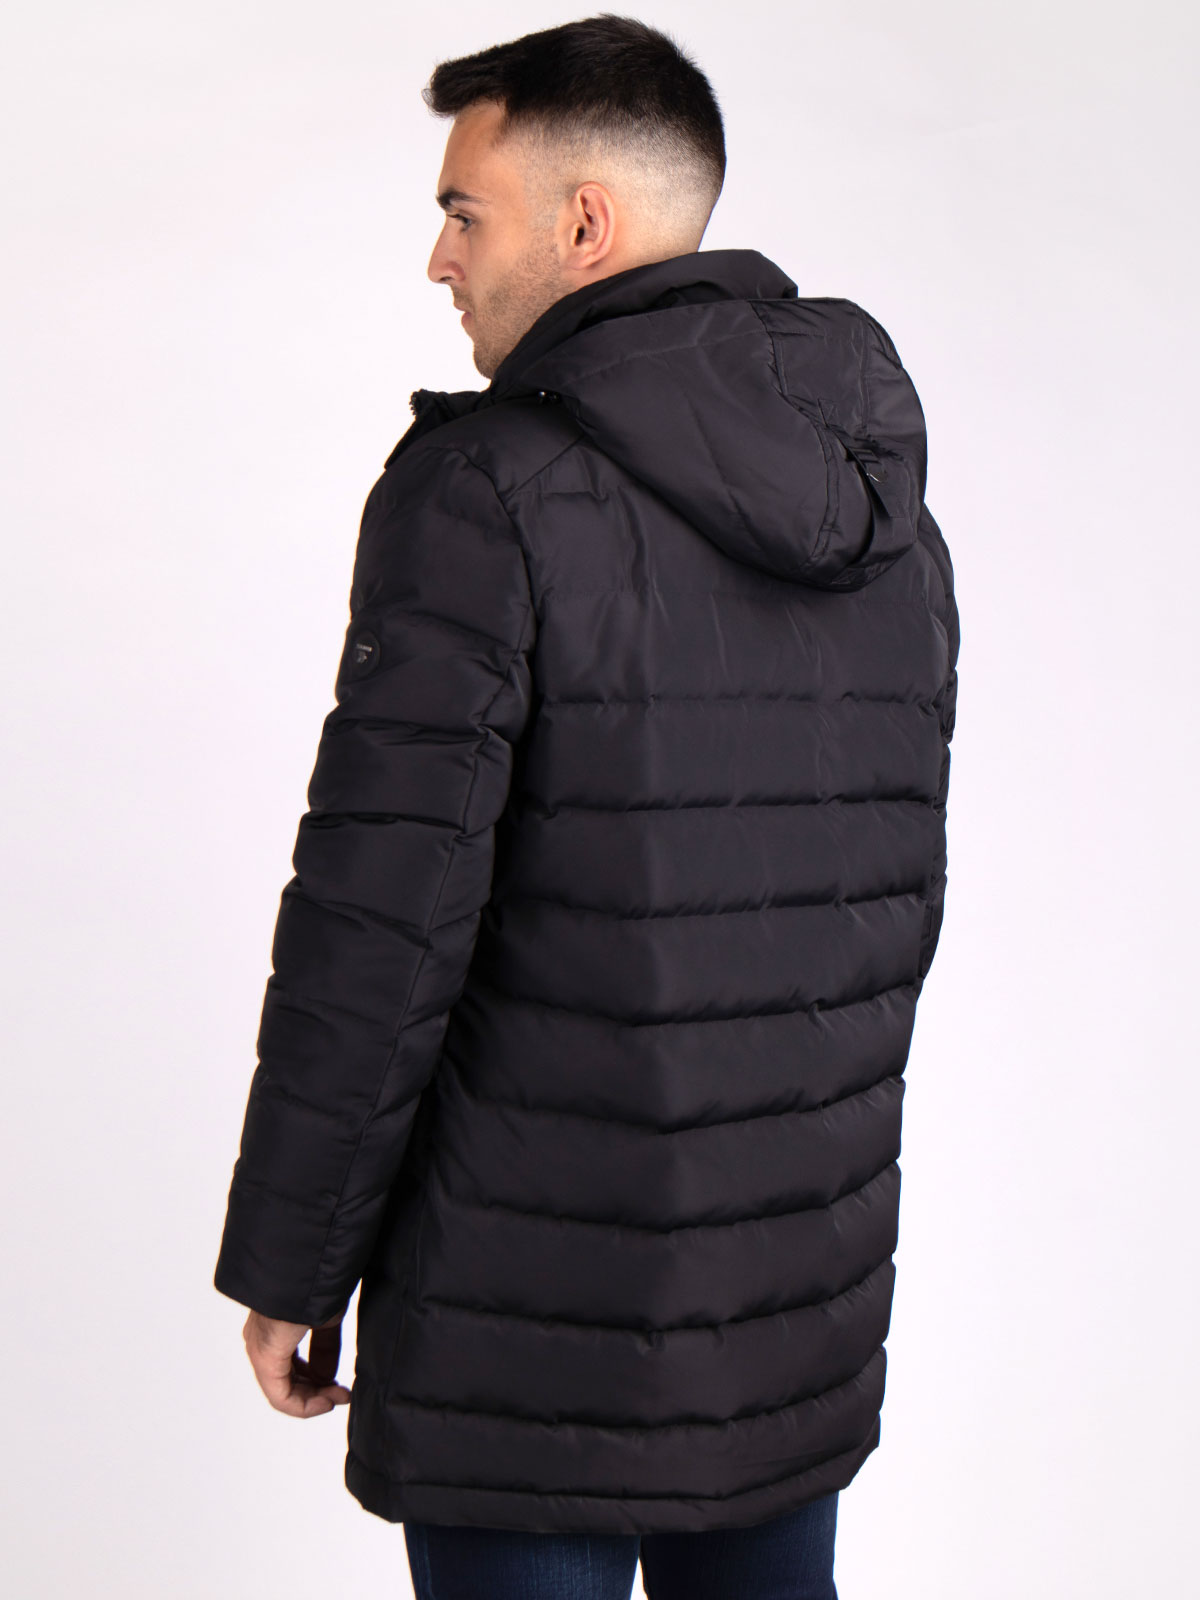 Black long quilted jacket with hood - 65106 € 151.29 img3